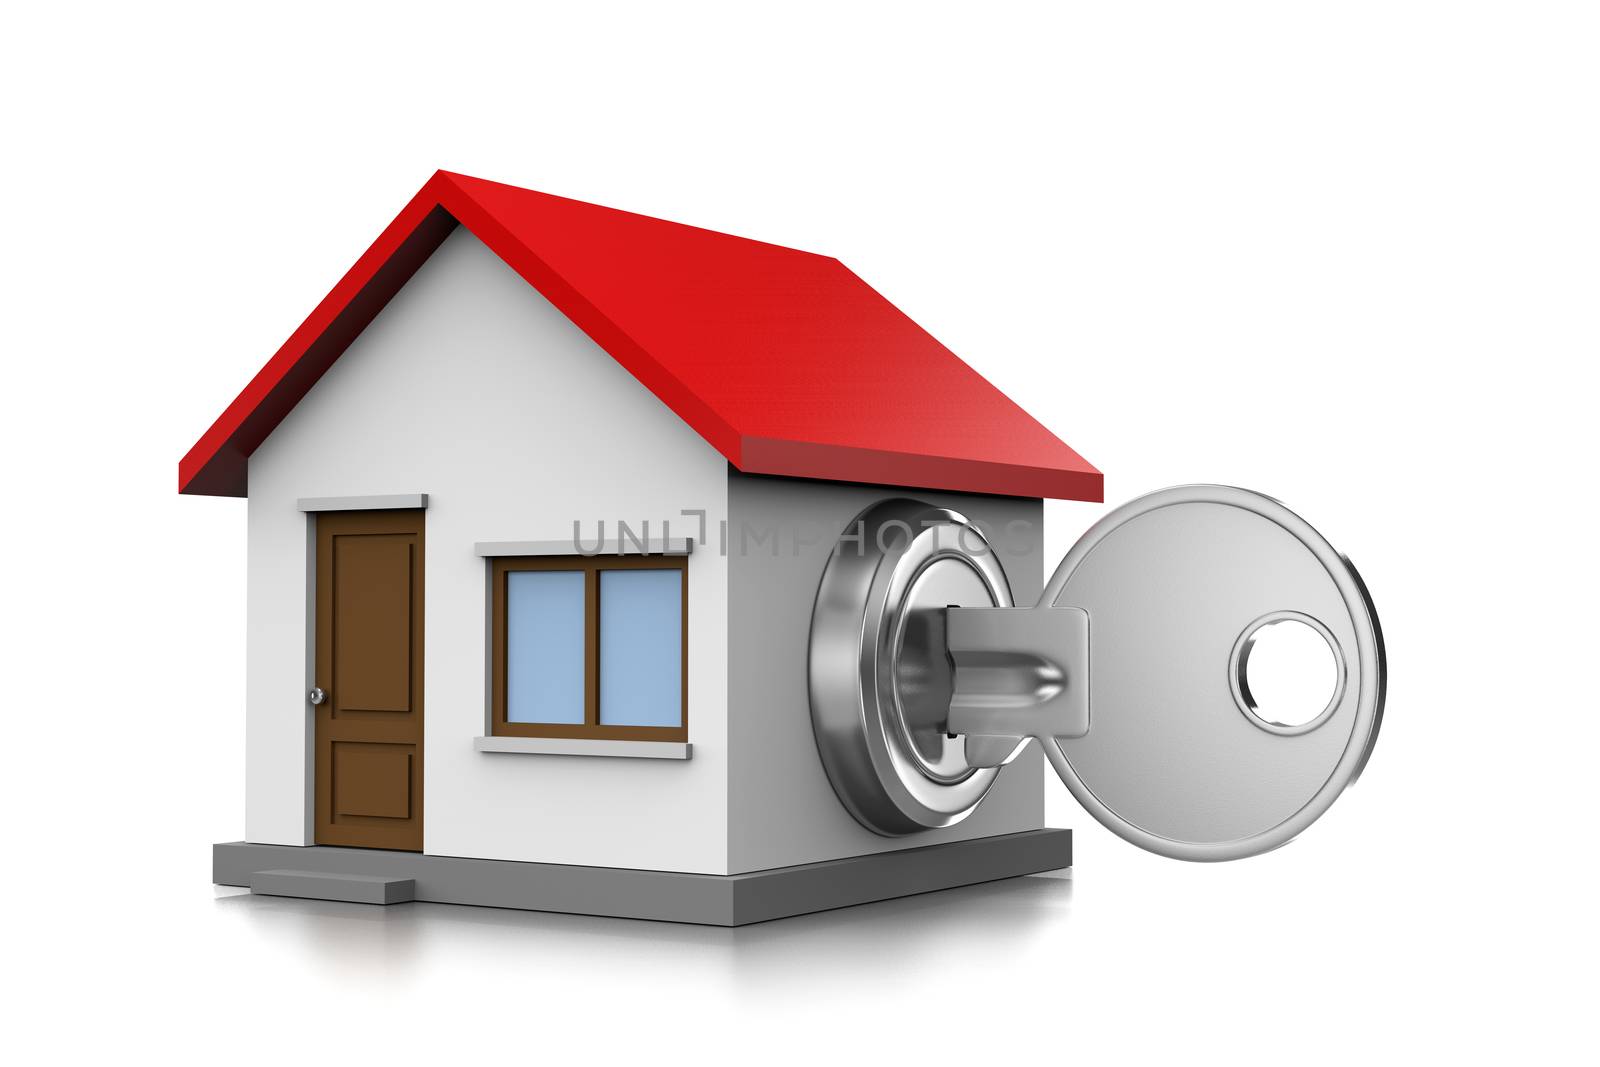 Metal Key Inserted in an House Shaped Lock 3D Illustration on White Background